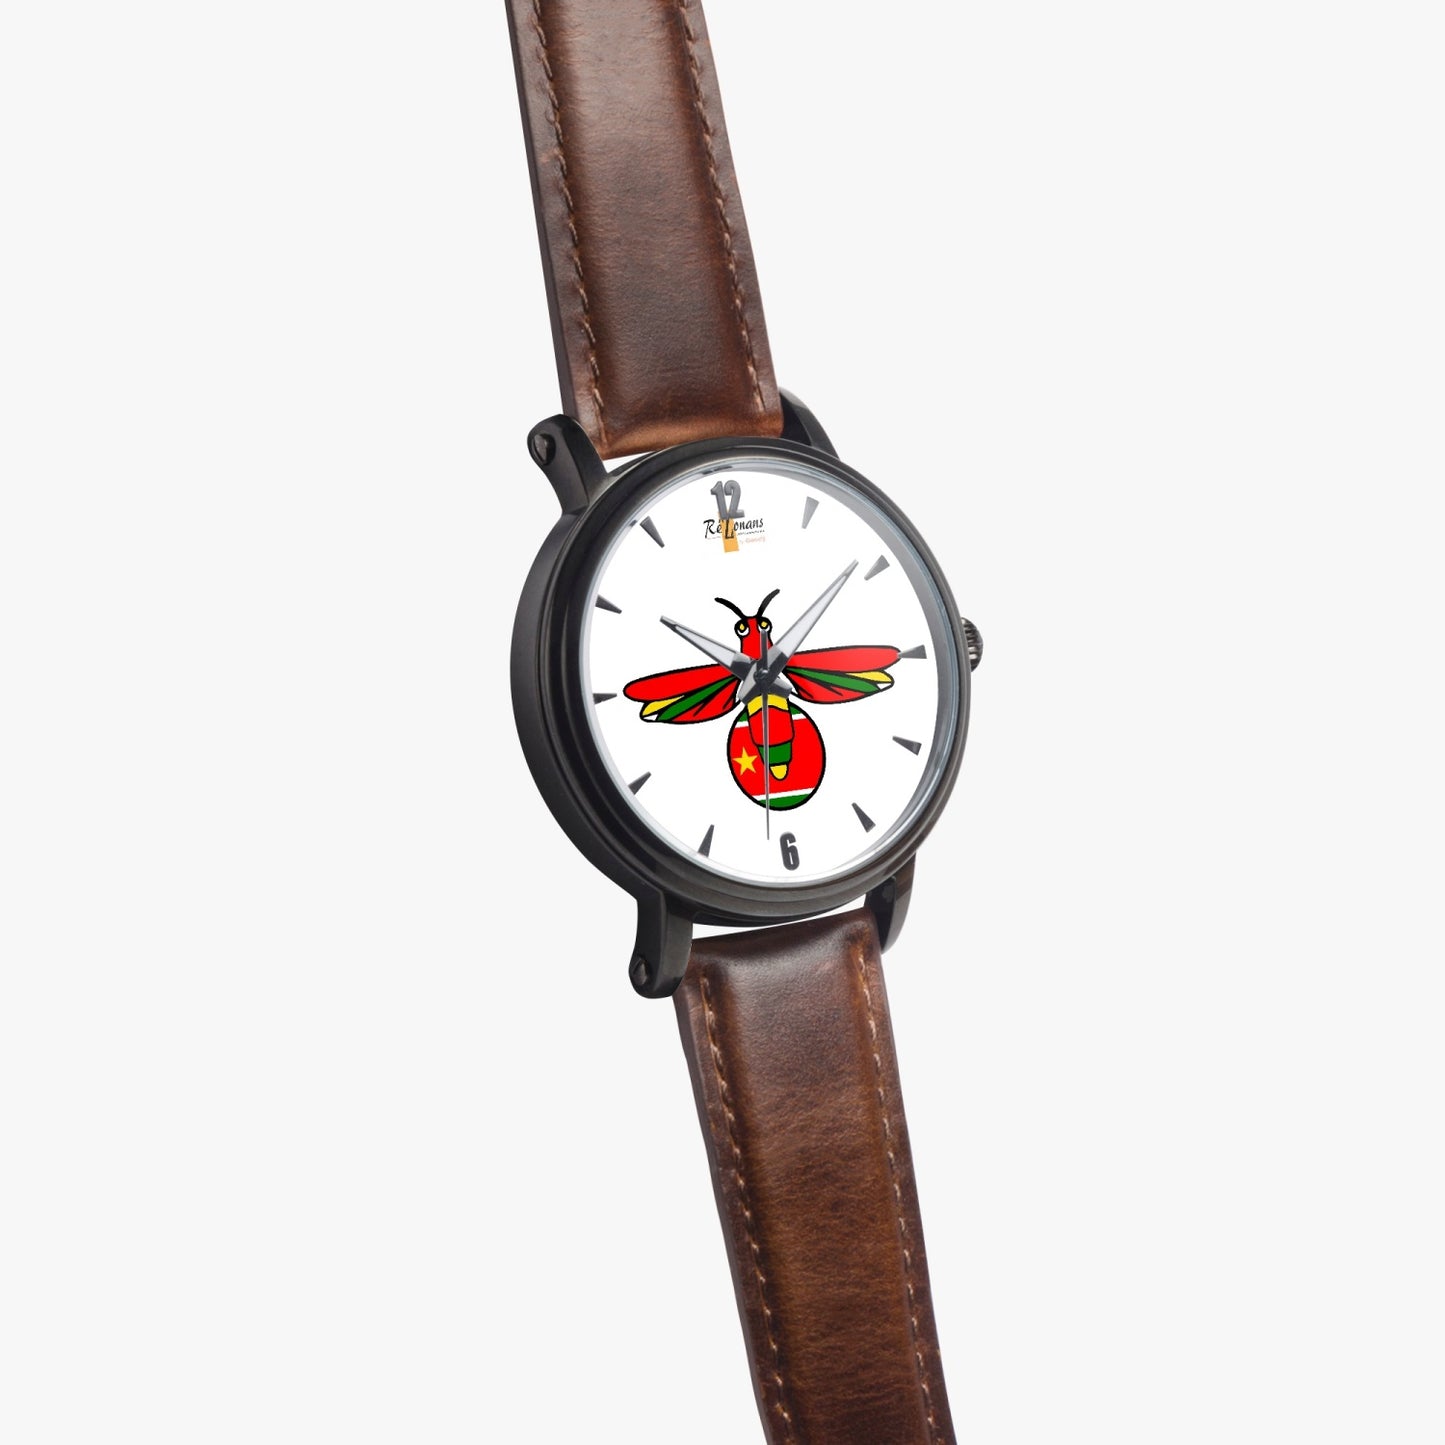 Automatic leather watch "Klendenden" (with indicators)